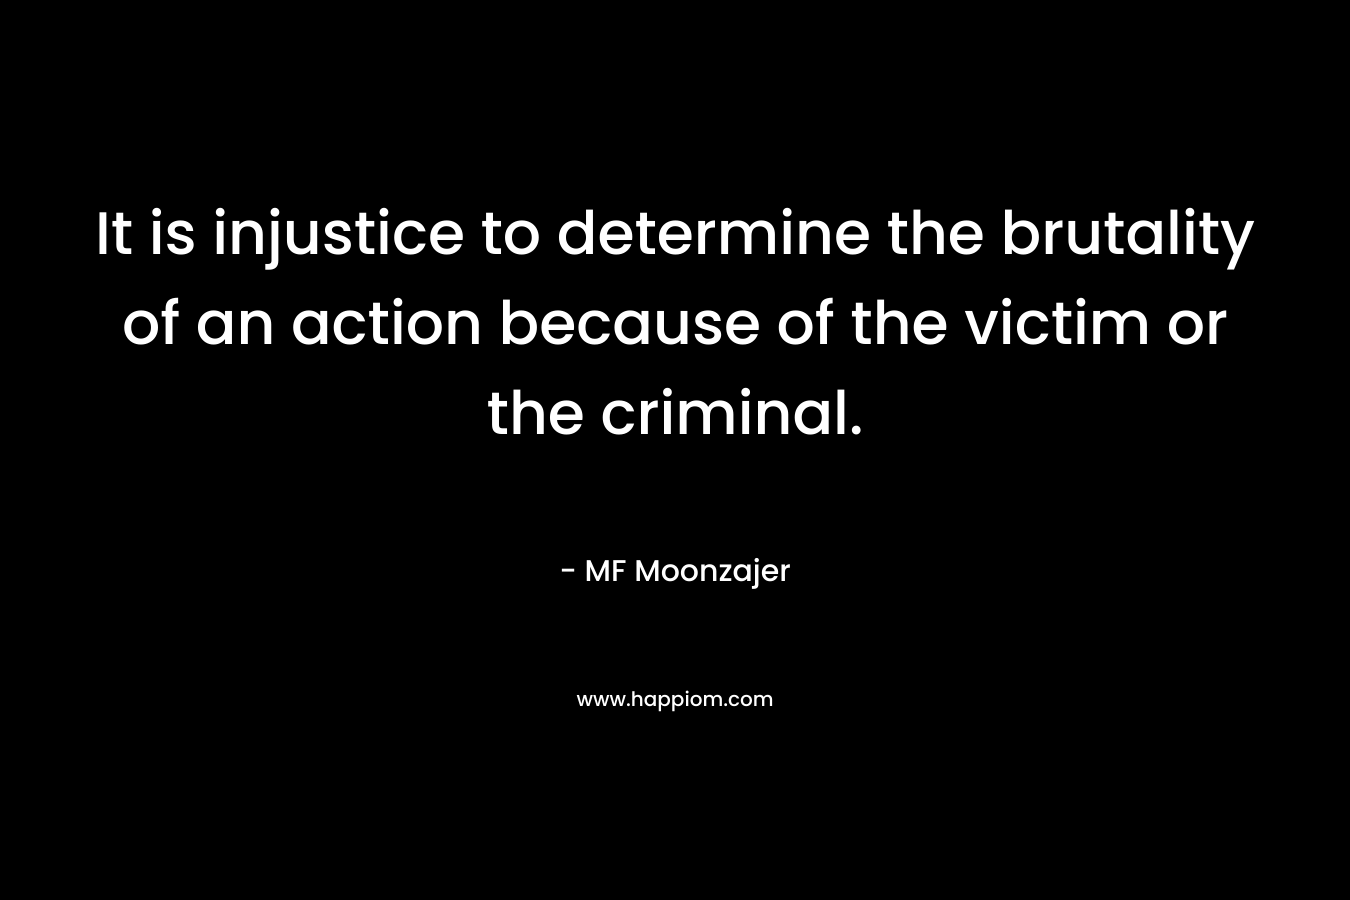 It is injustice to determine the brutality of an action because of the victim or the criminal. – MF Moonzajer